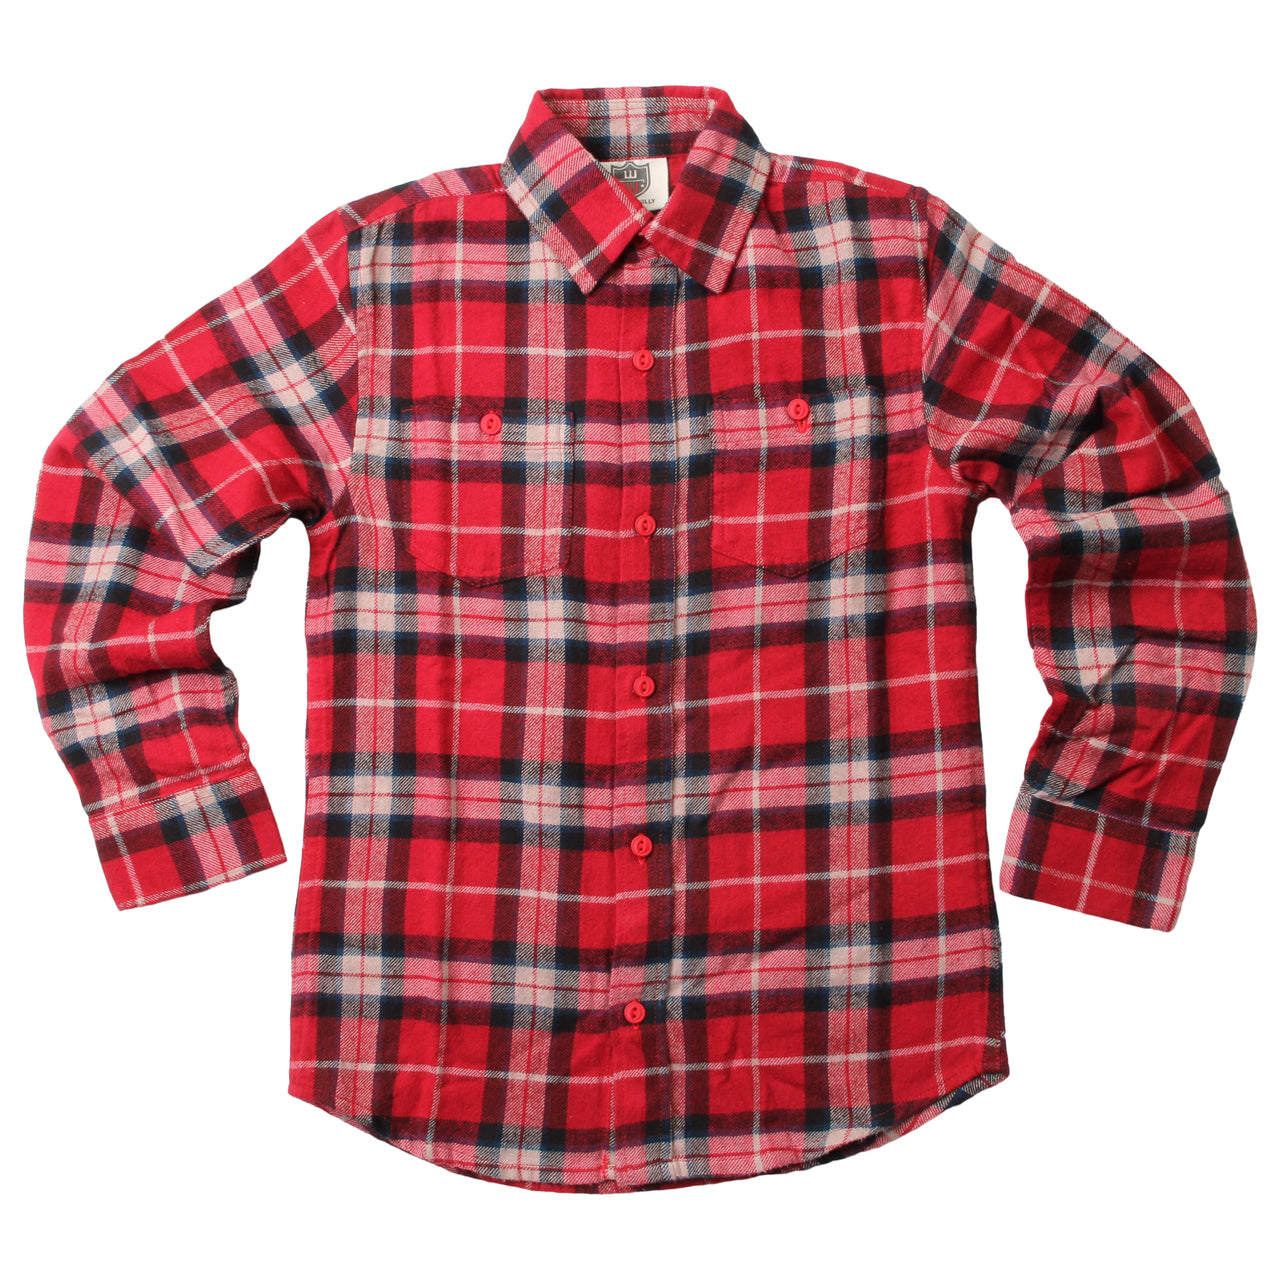 Wes & Willy Boy's Flannel Shirt